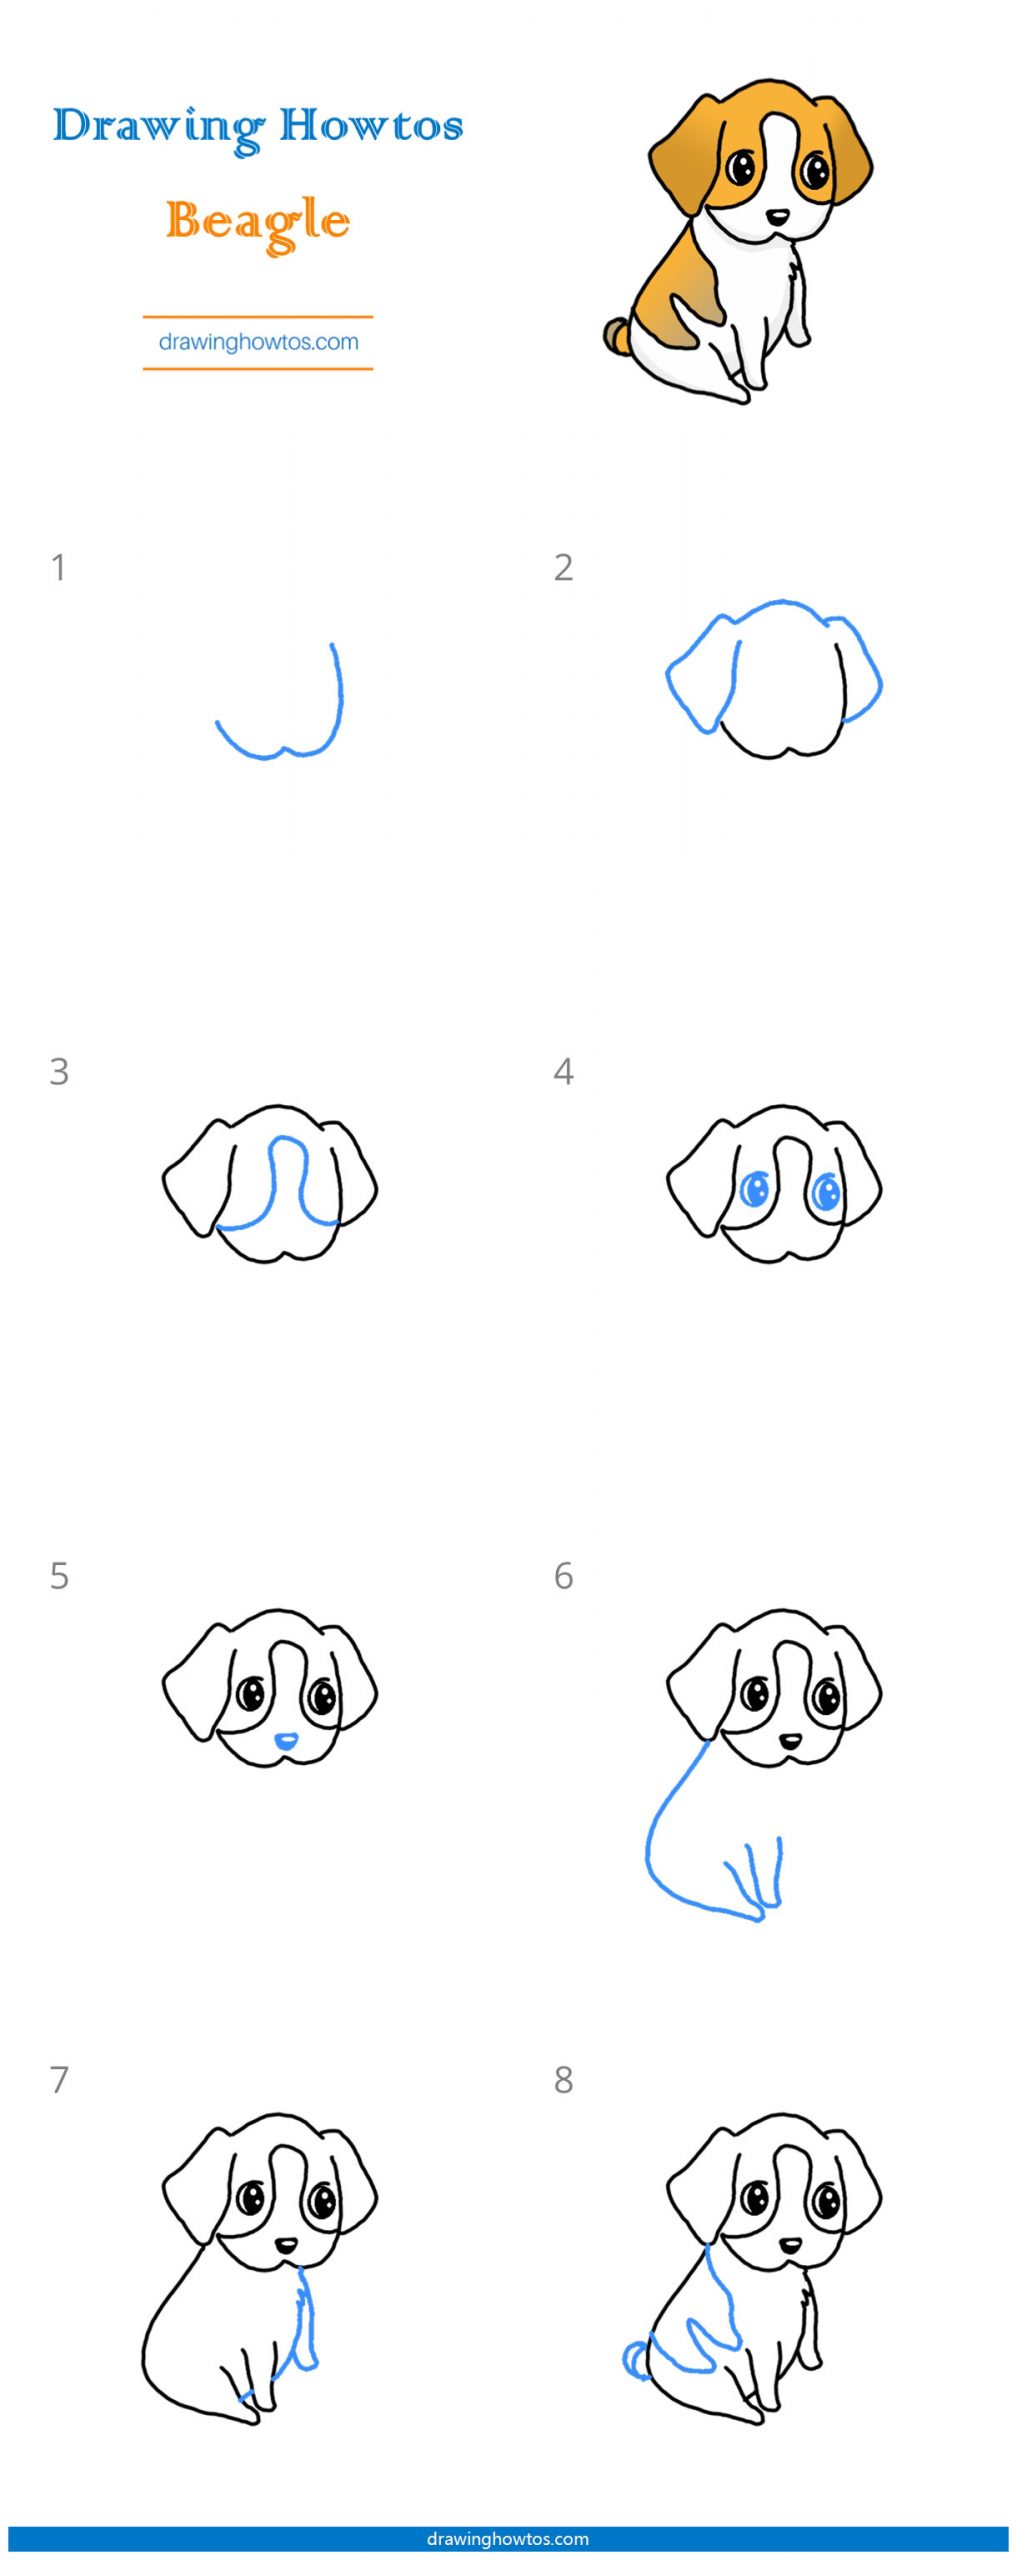 How to Draw a Beagle Step by Step